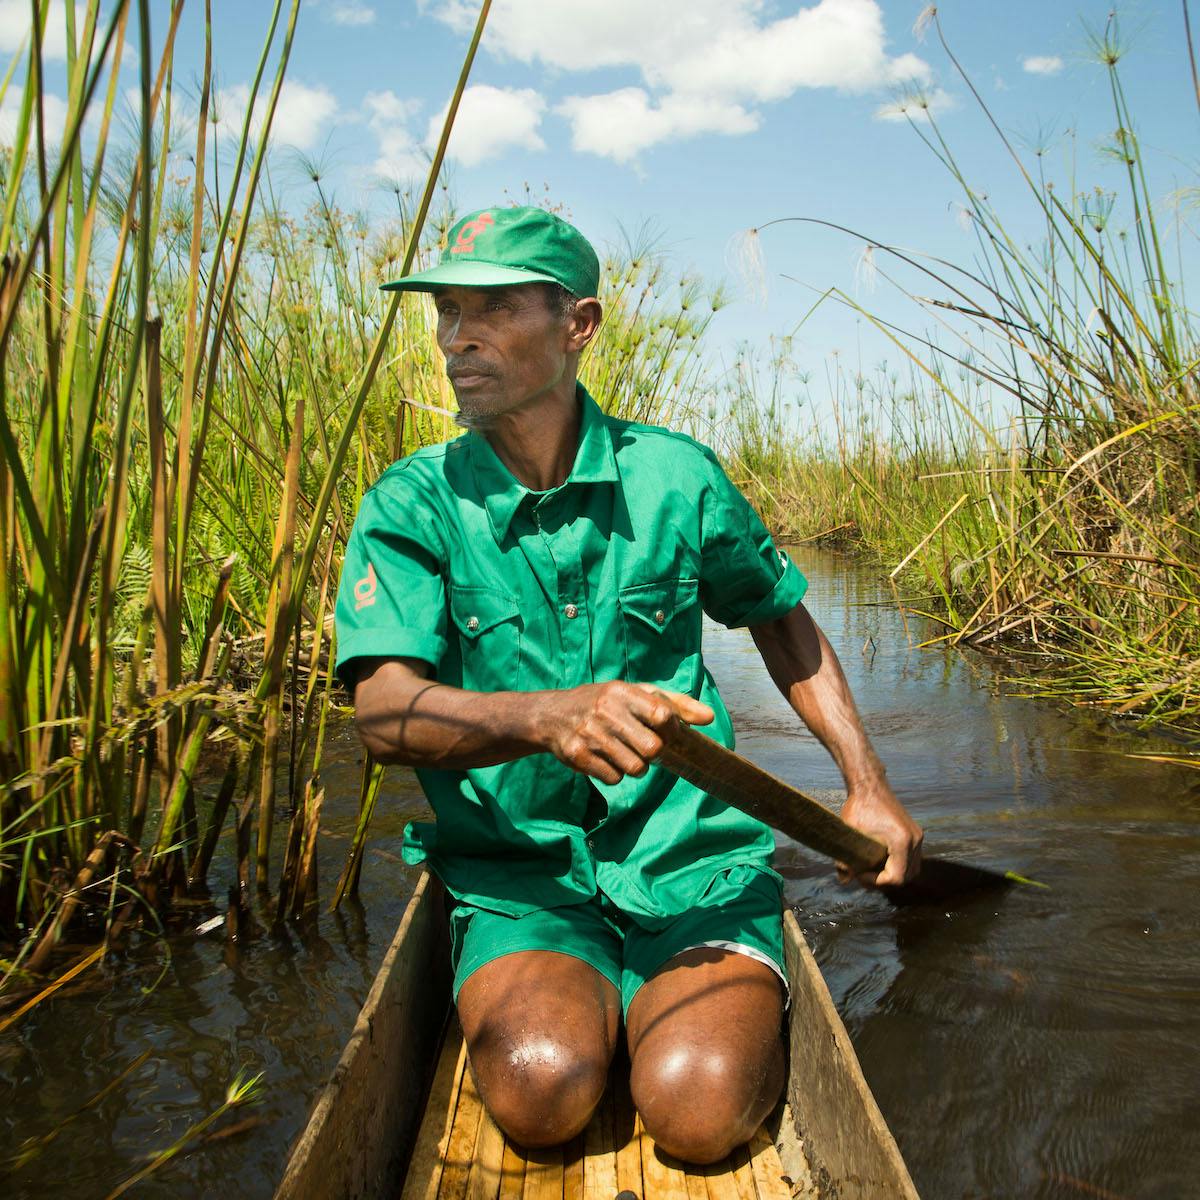 A man kneels in a wooden canoe in a green uniform as he travels through green reed beds